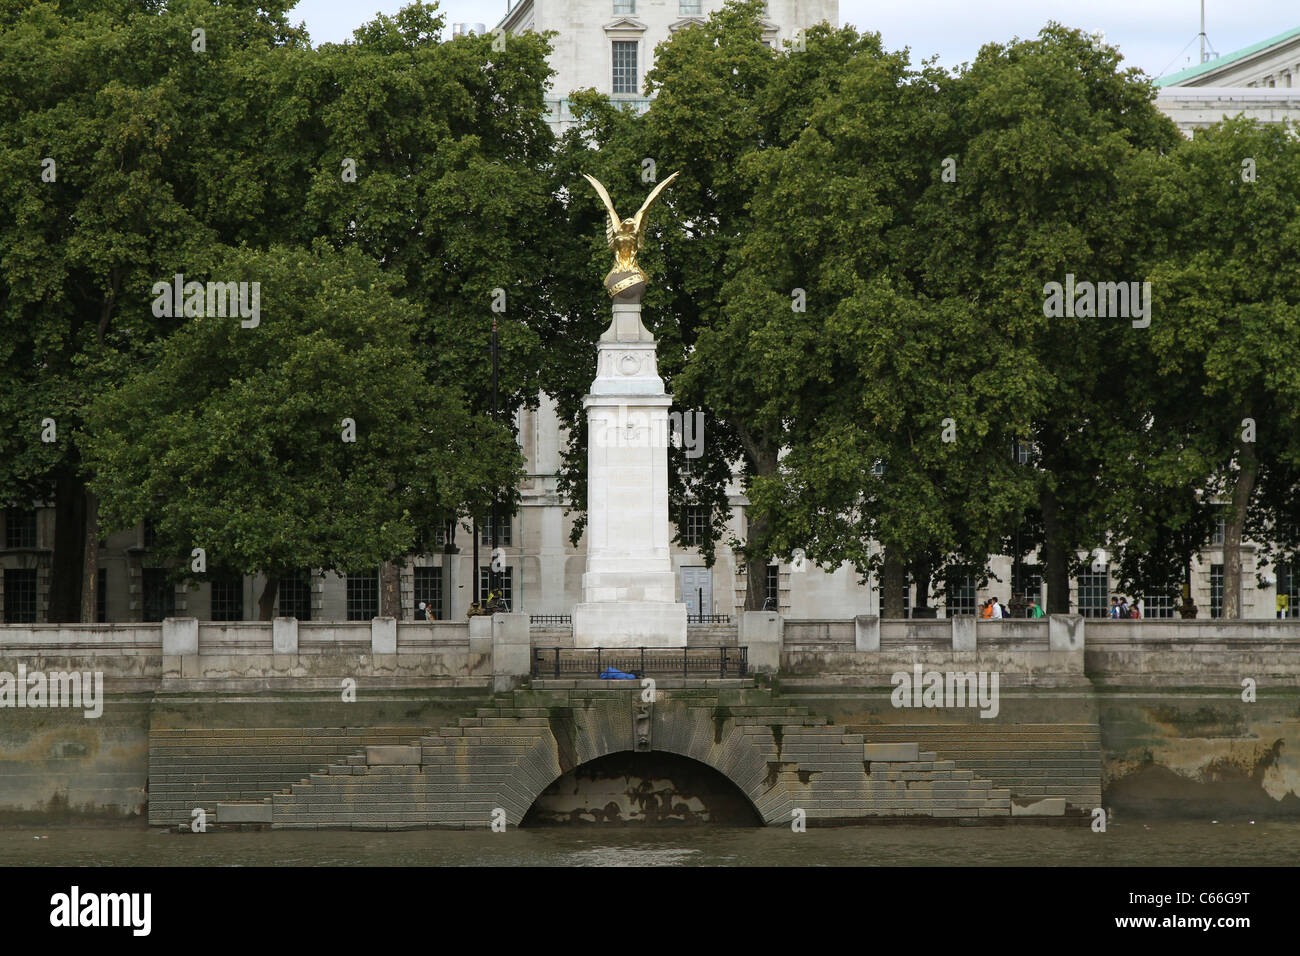 The Royal Air Force Memorial stands on the Victoria Embankment near the river Thames in Westminster in the city of London England GB UK 2011 Stock Photo